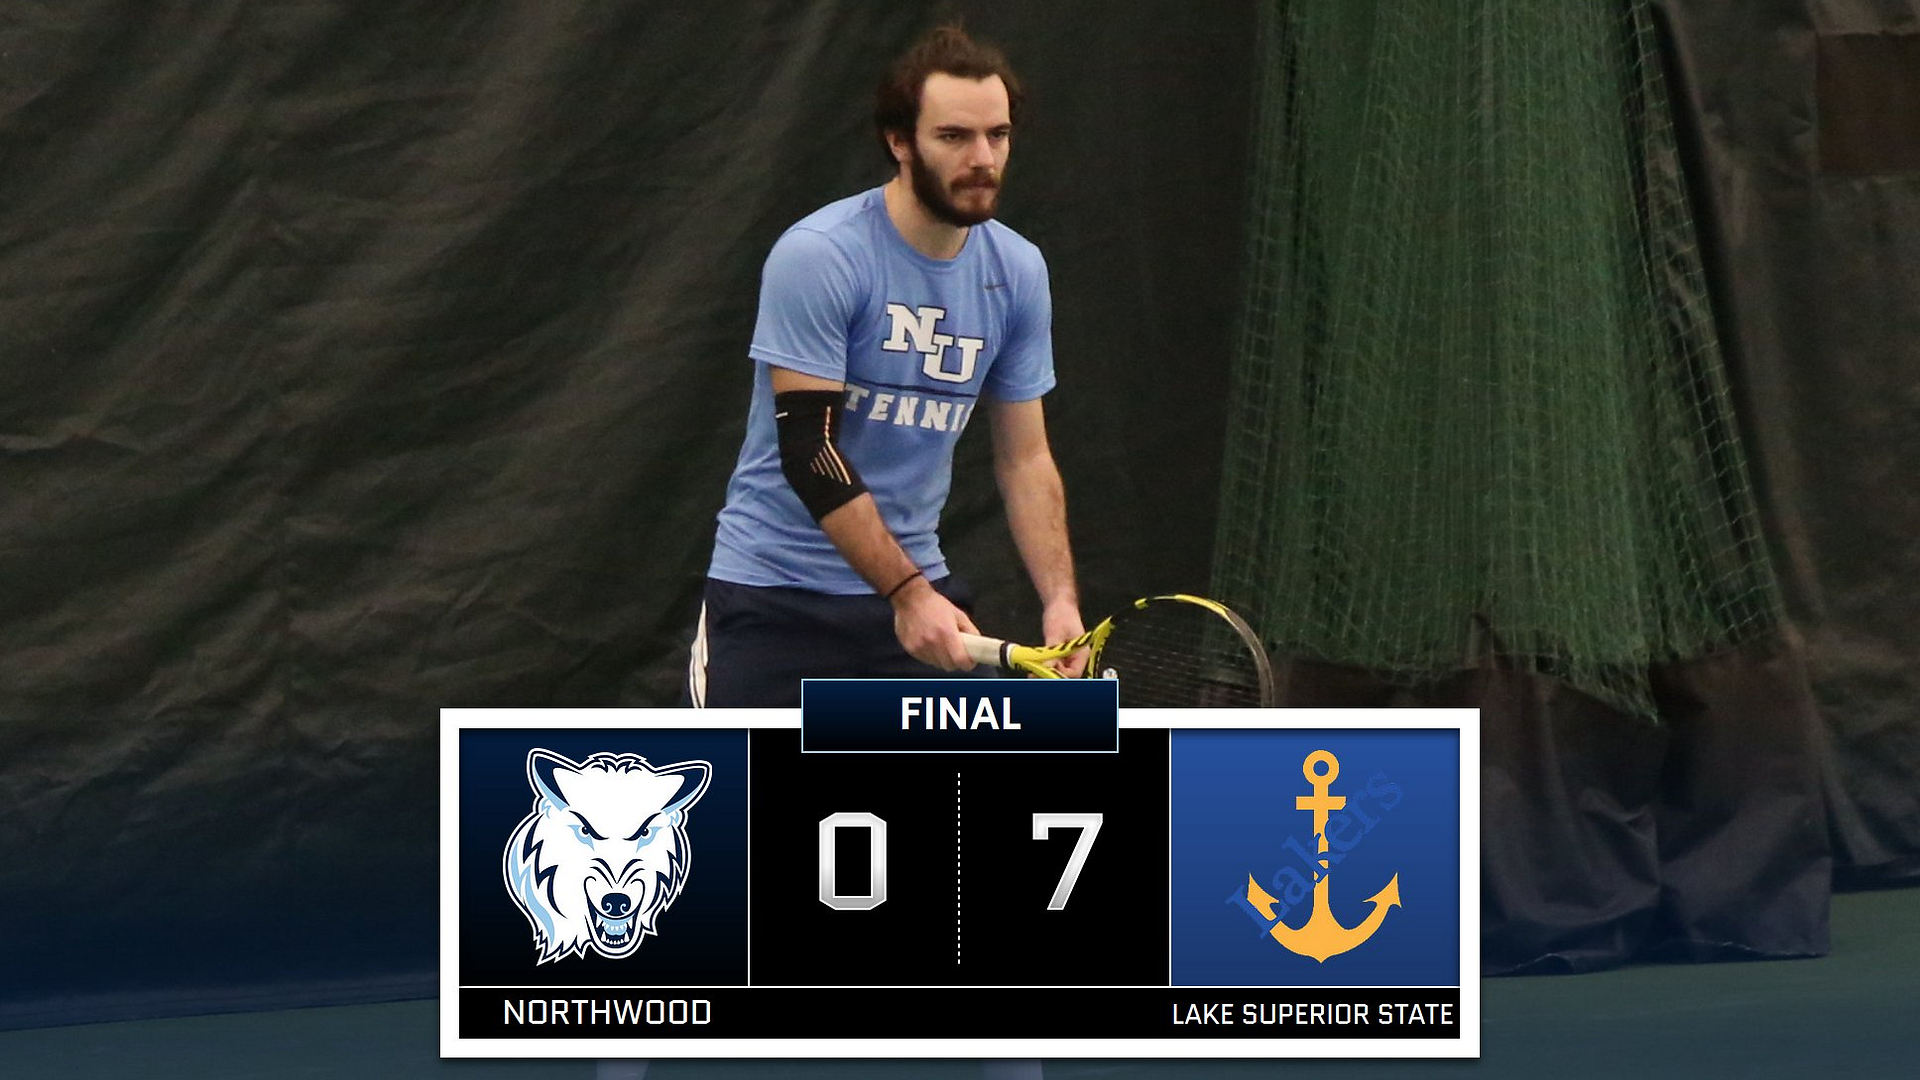 Men's Tennis Drops 7-0 Match To Lake Superior State